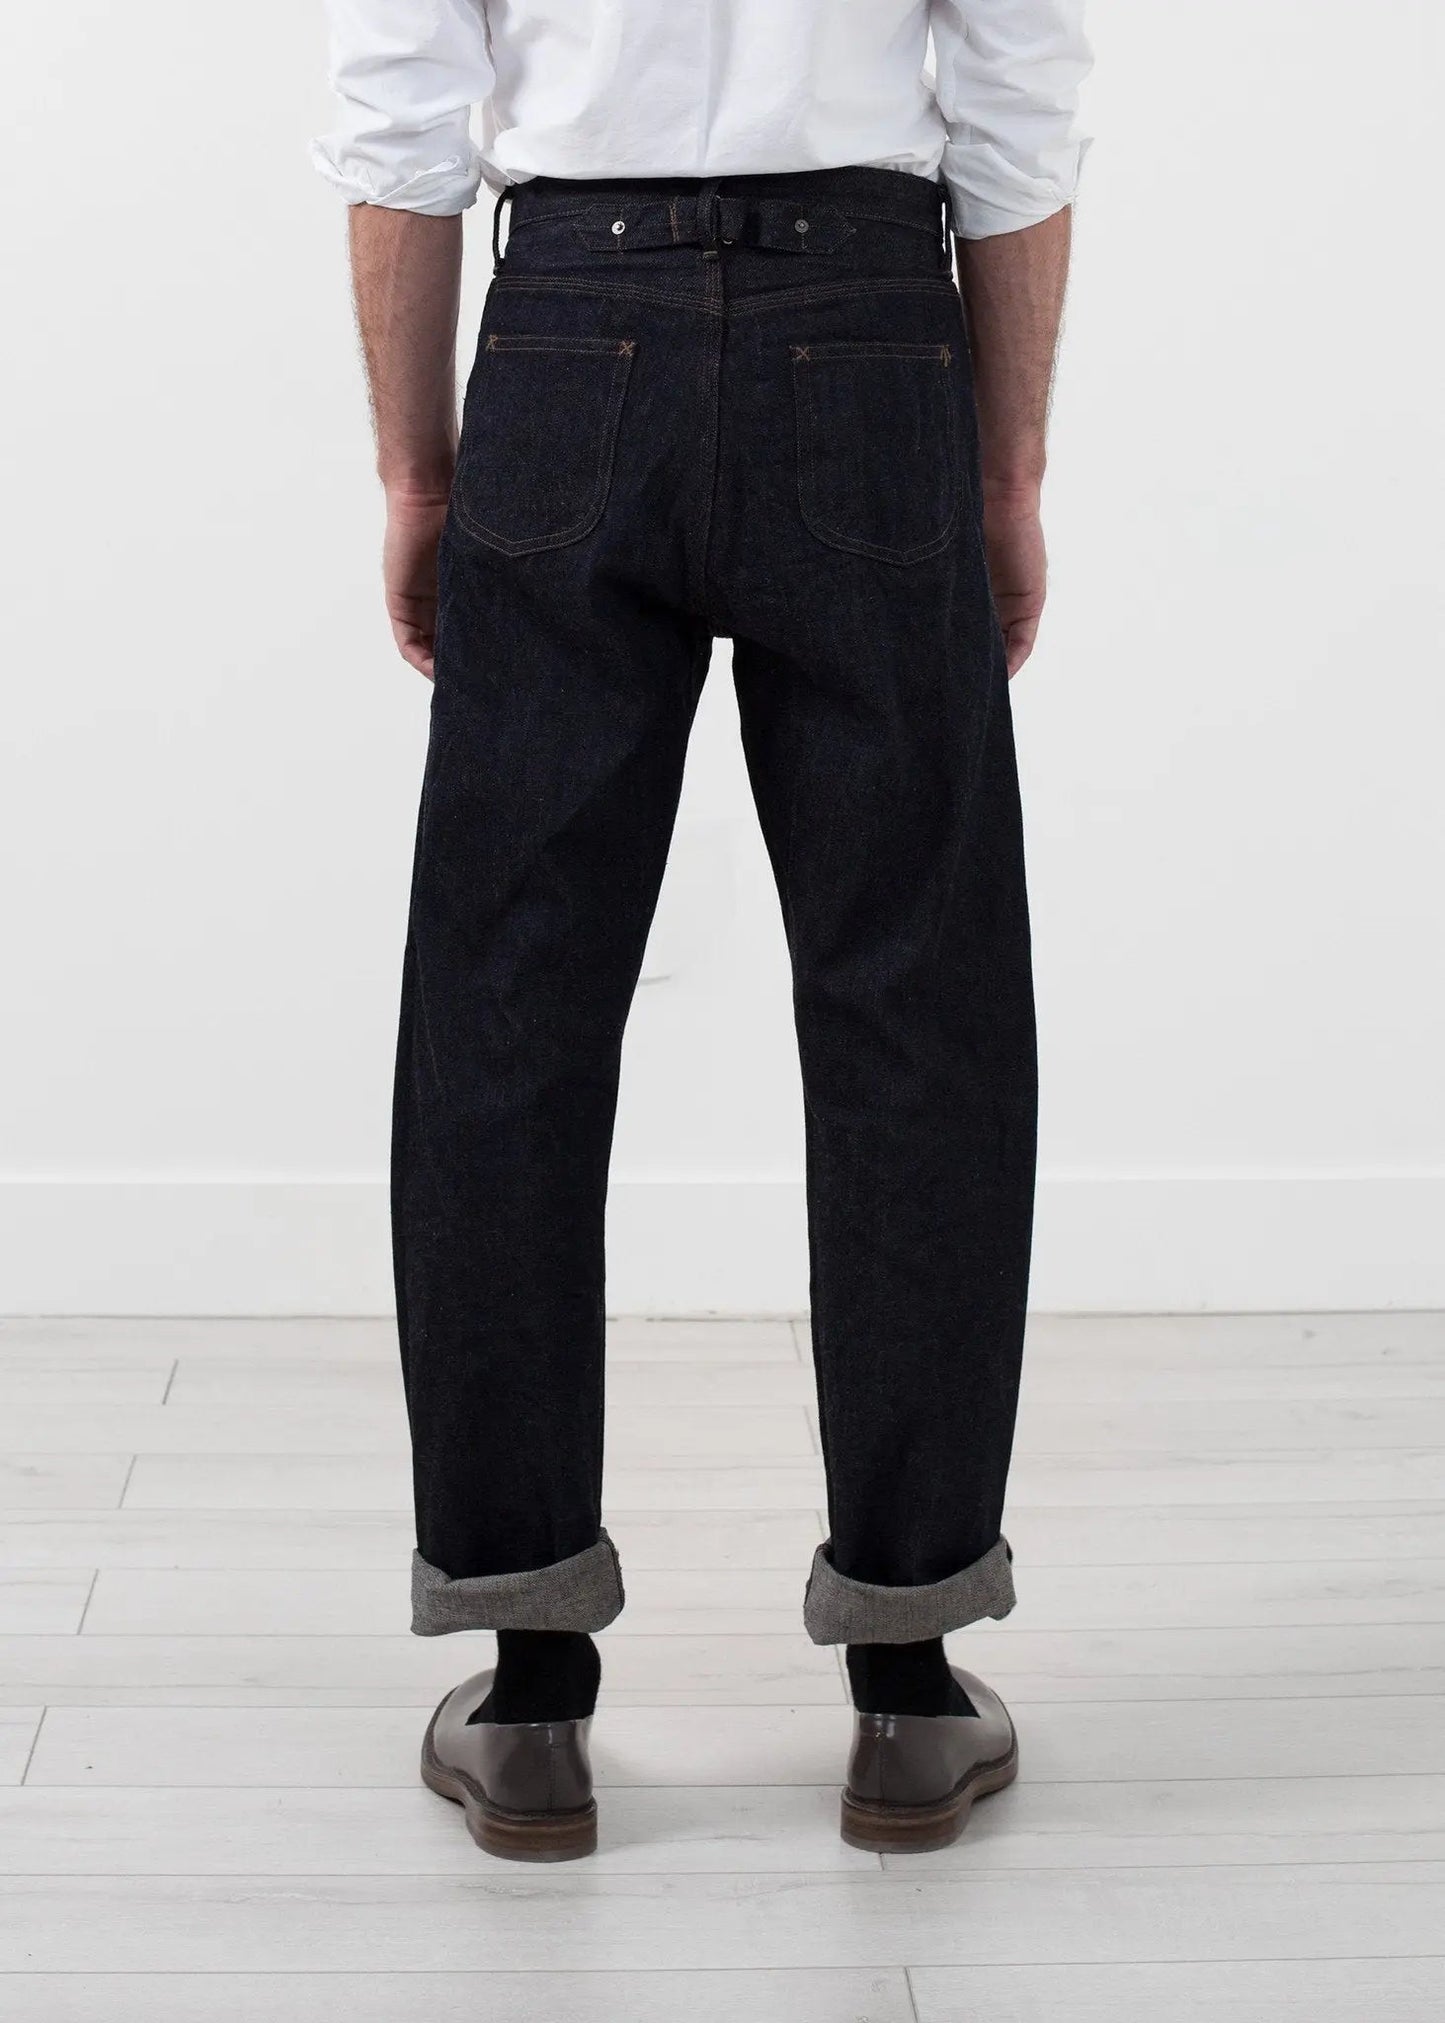 5 Pocket Jean <br>Pocket Jean by Nigel Cabourn is your deni.This is a demonstration store. You can purchase proer cinch-back strap in back. - formtest11